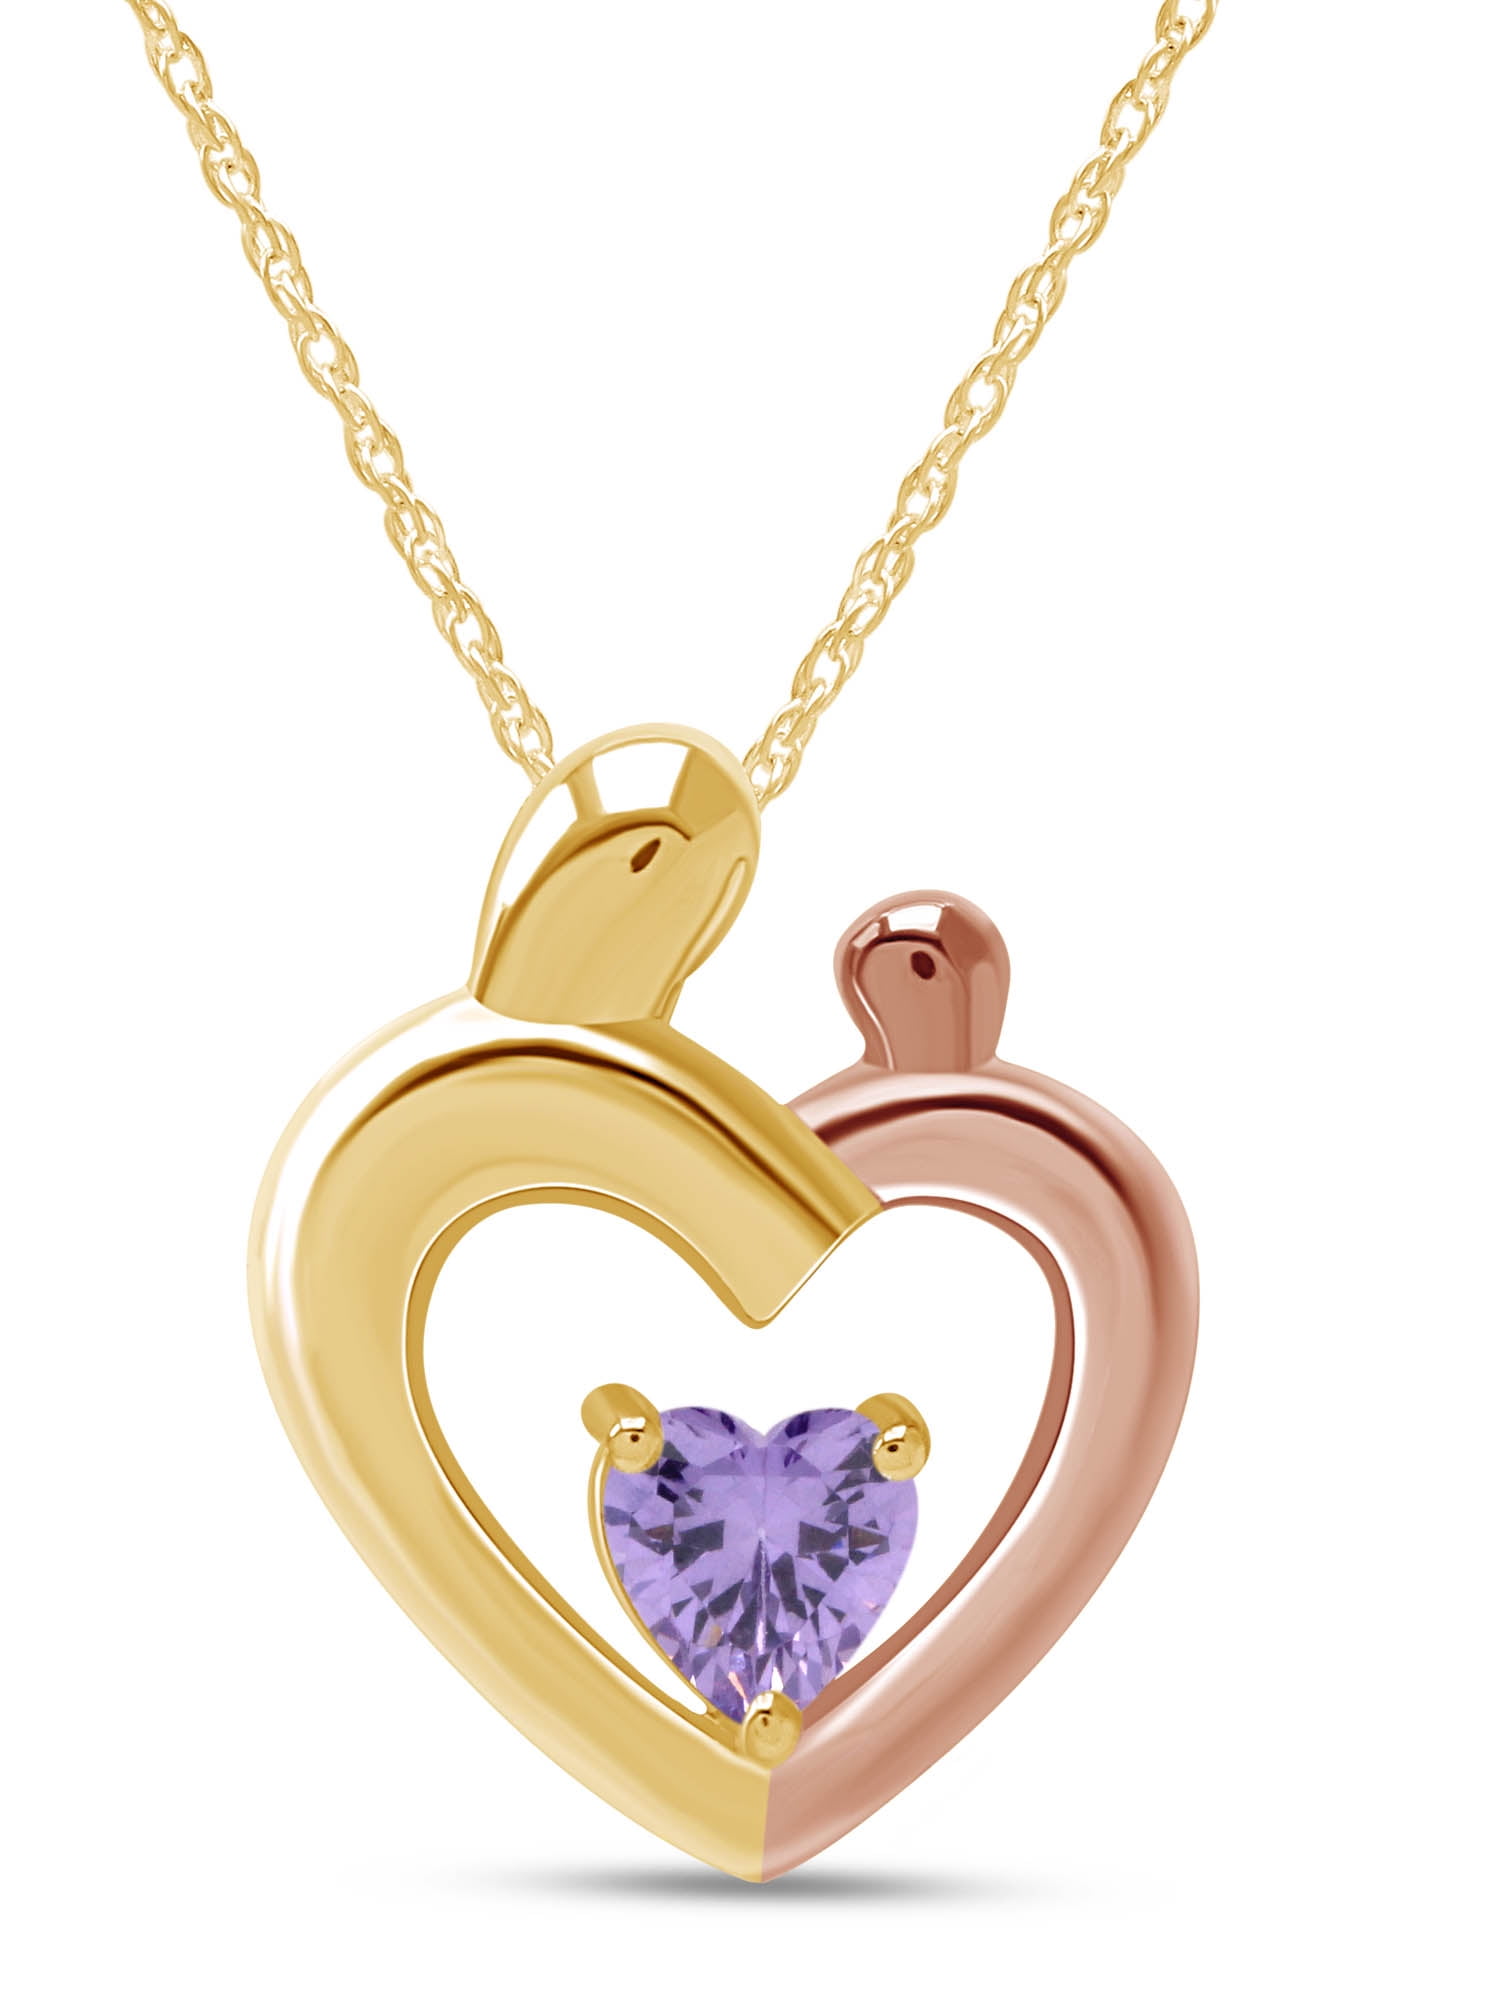 Jewel Zone US Round Cut Natural Diamond Beaded Heart Infinity Pendant Necklace 14k Gold Over Sterling Silver